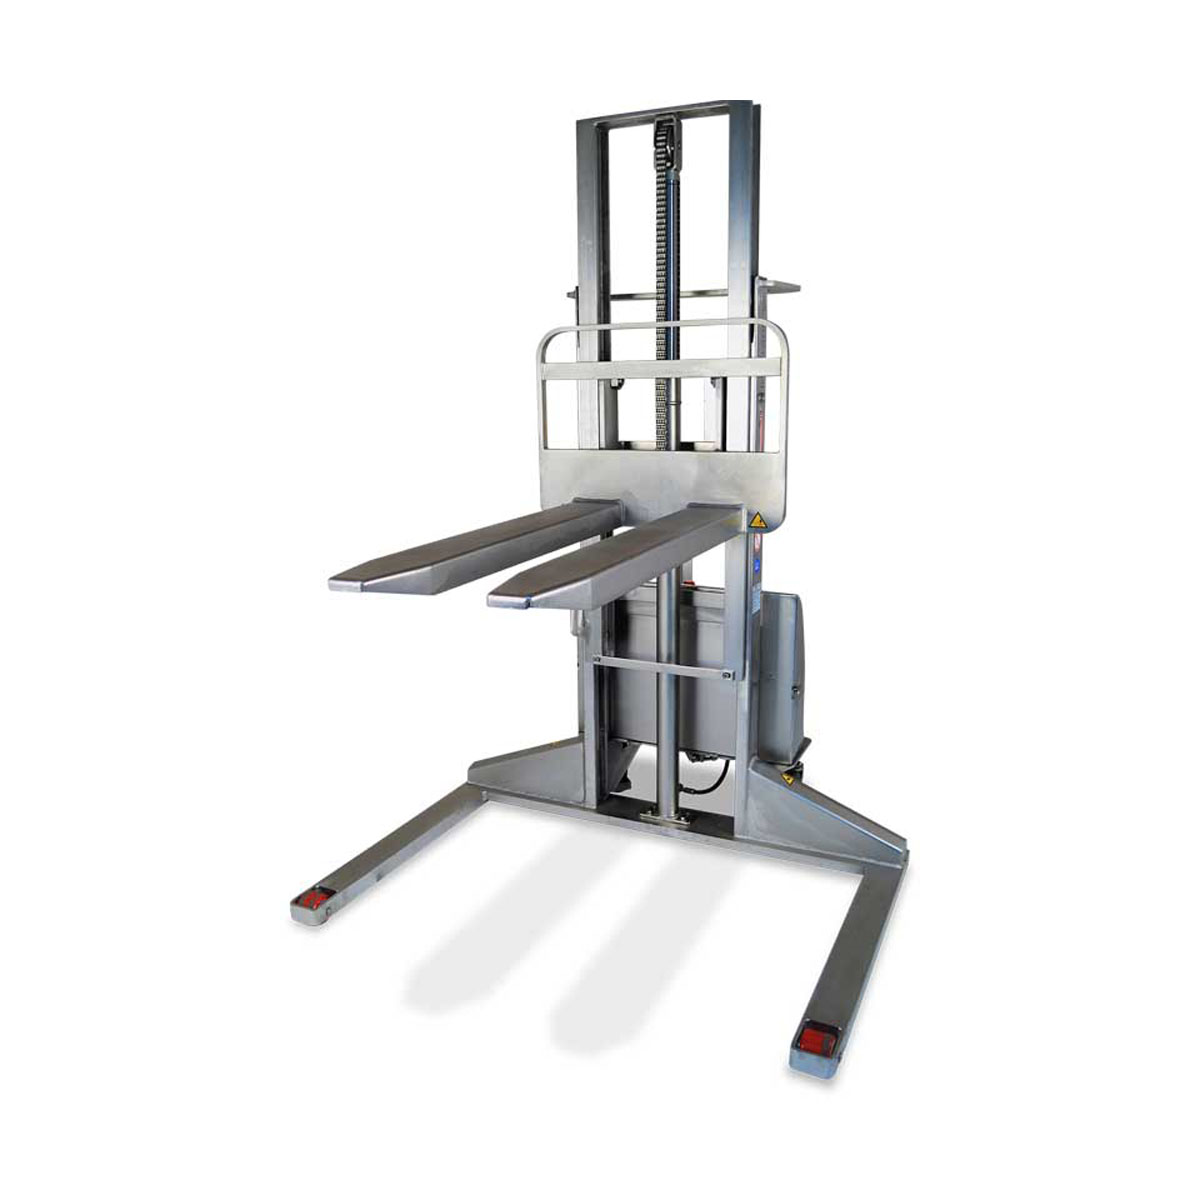 Buy Semi-electric Straddle Stacker available at Astrolift NZ